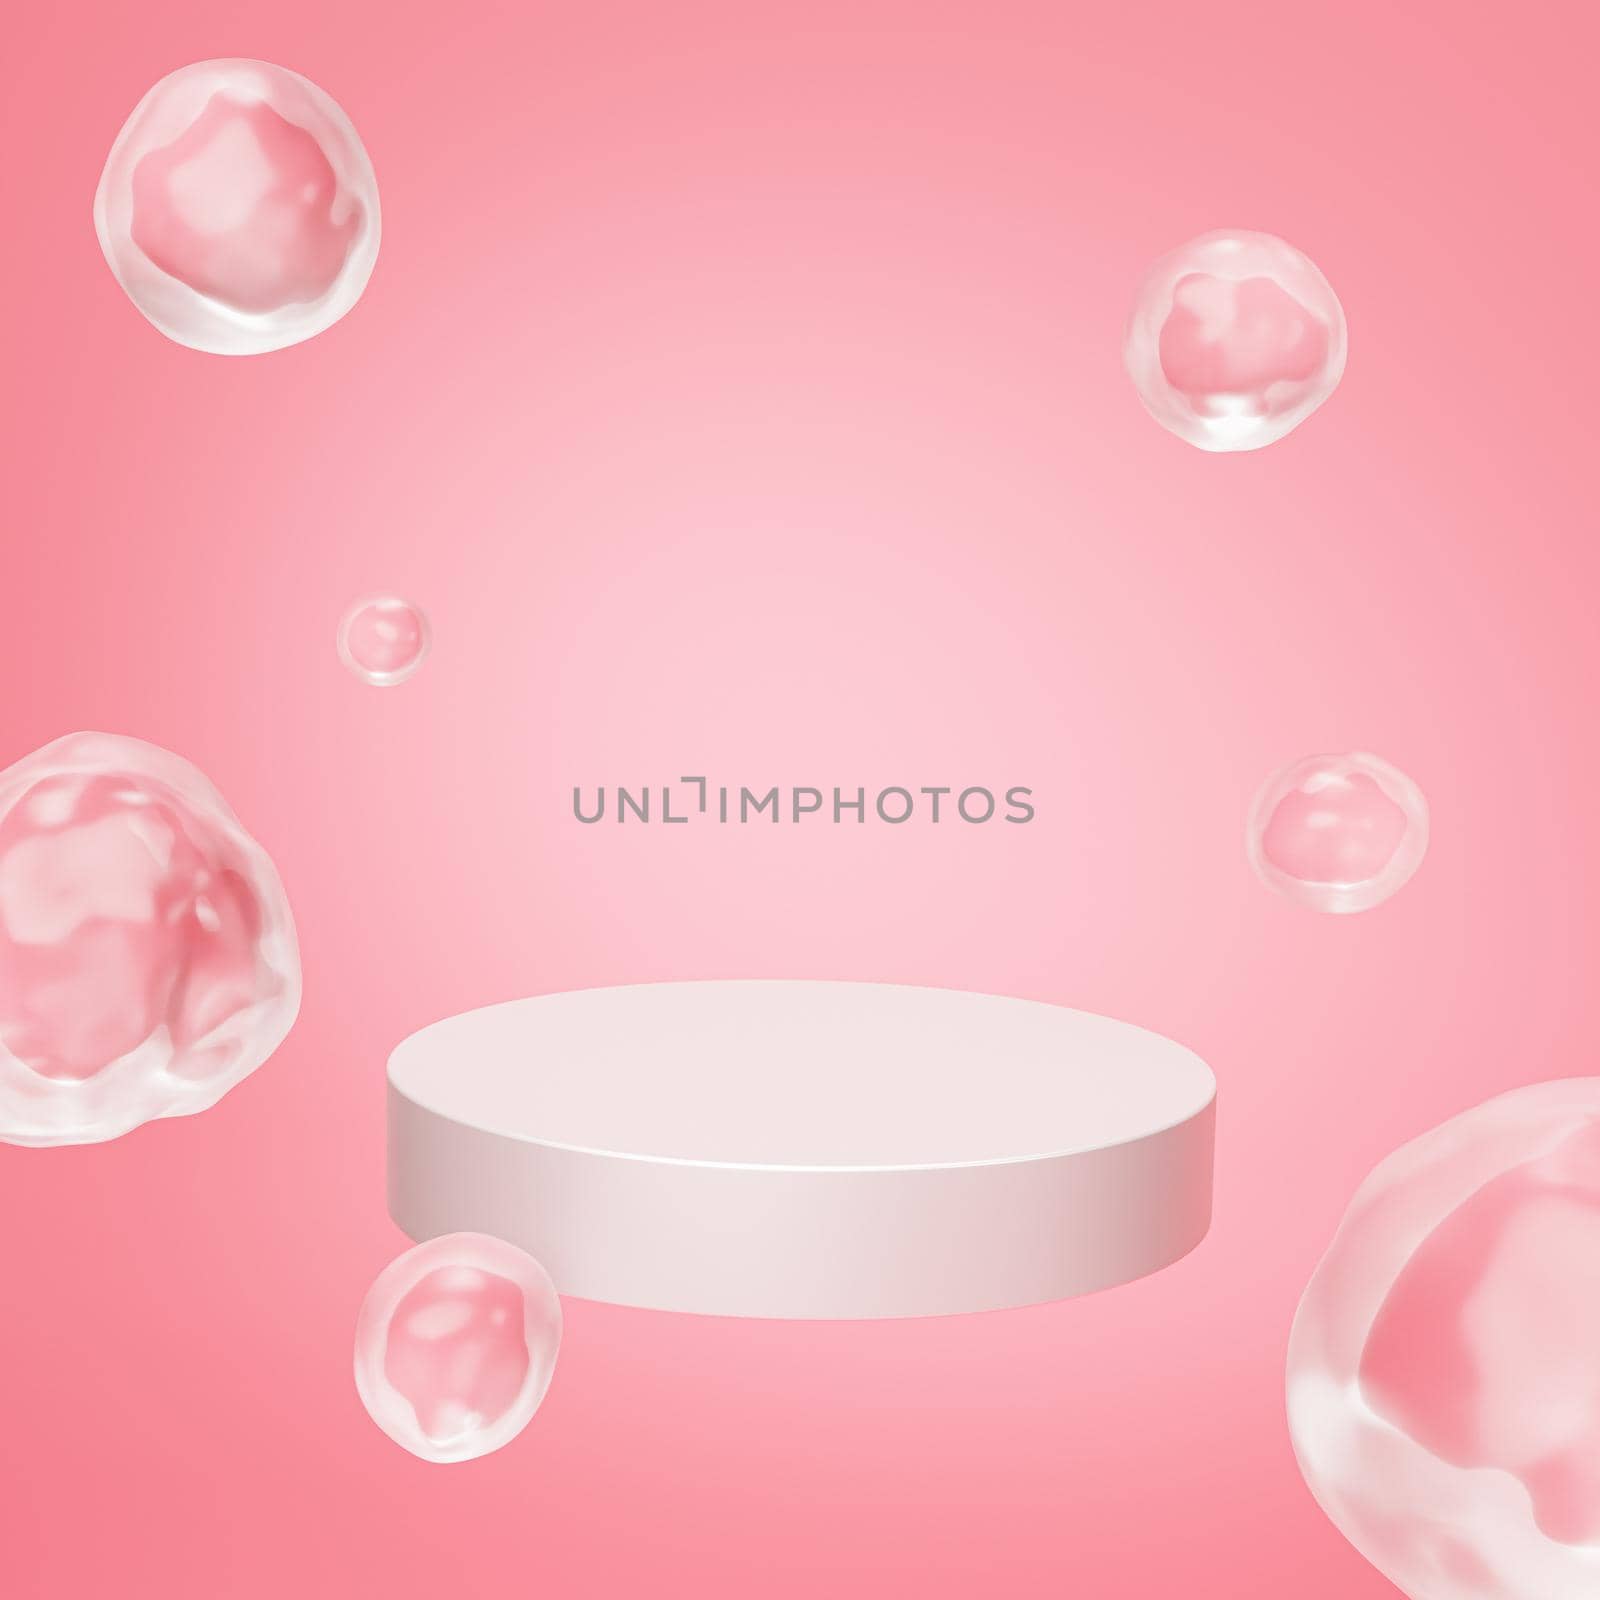 Beige podium or pedestal for products or advertising with bubbles on pastel pink background, 3d render